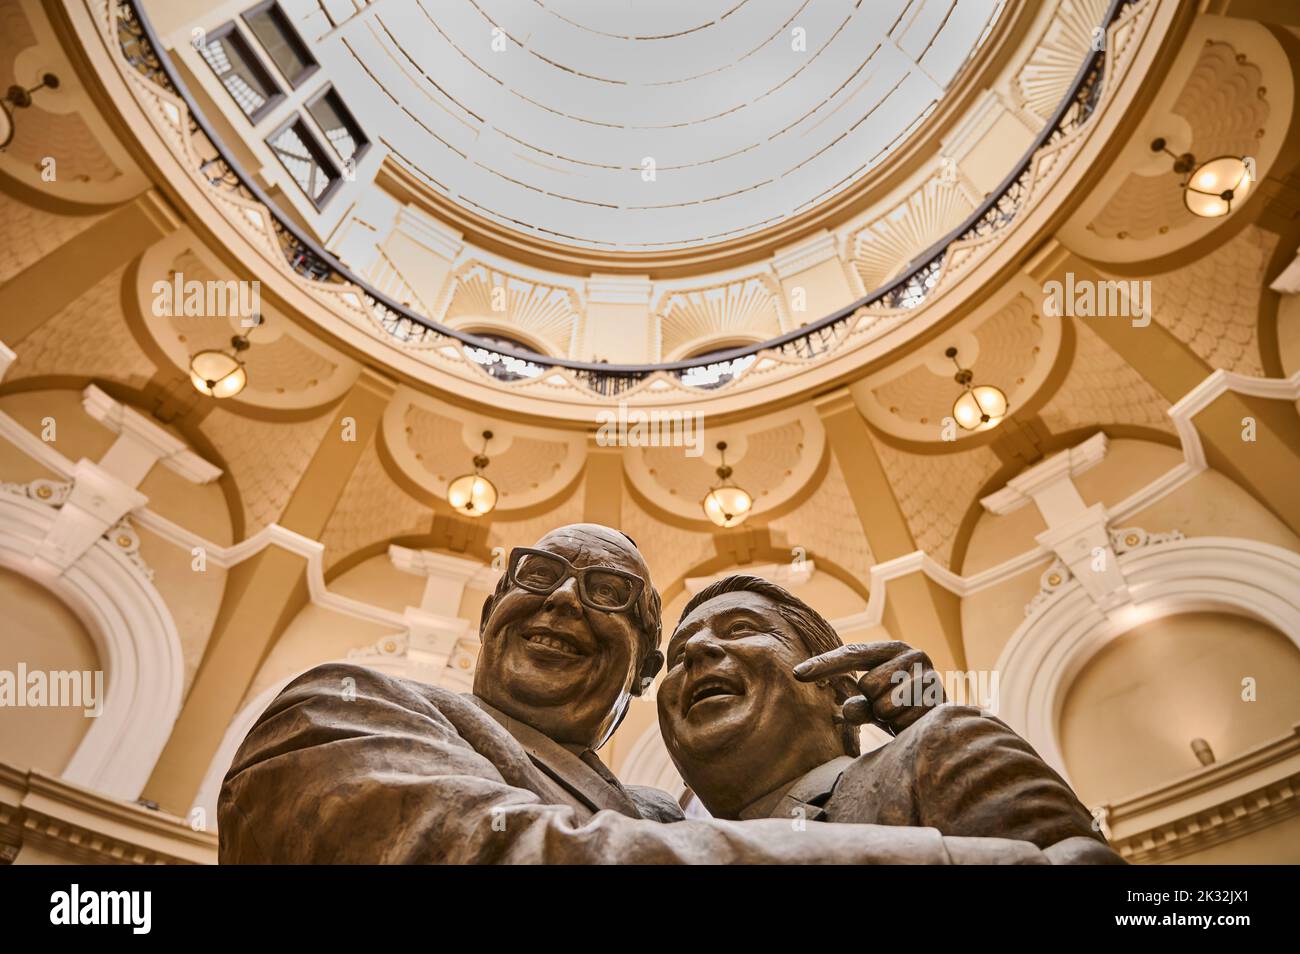 The statue of comedy duo Morecambe and Wise beneath the dome in the Winter Gardens,Blackpool Stock Photo